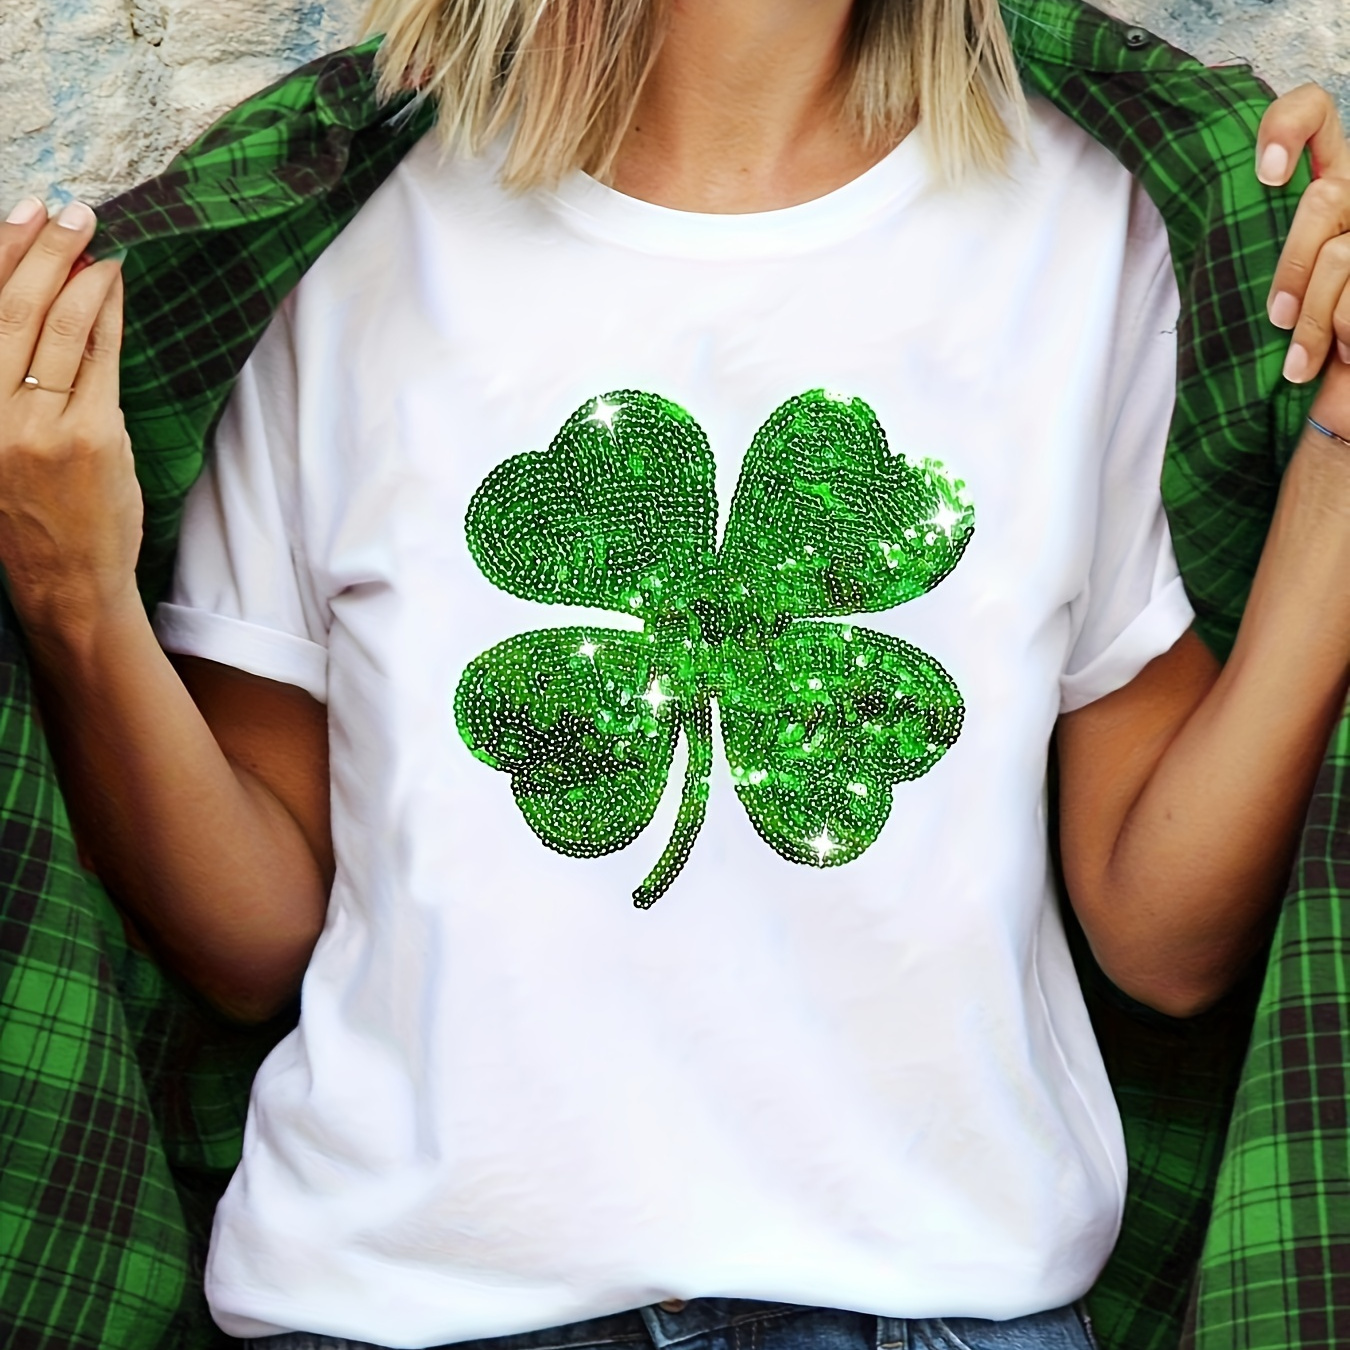 

Clover Print T-shirt, Short Sleeve Crew Neck Casual Top For Summer & Spring, Women's Clothing